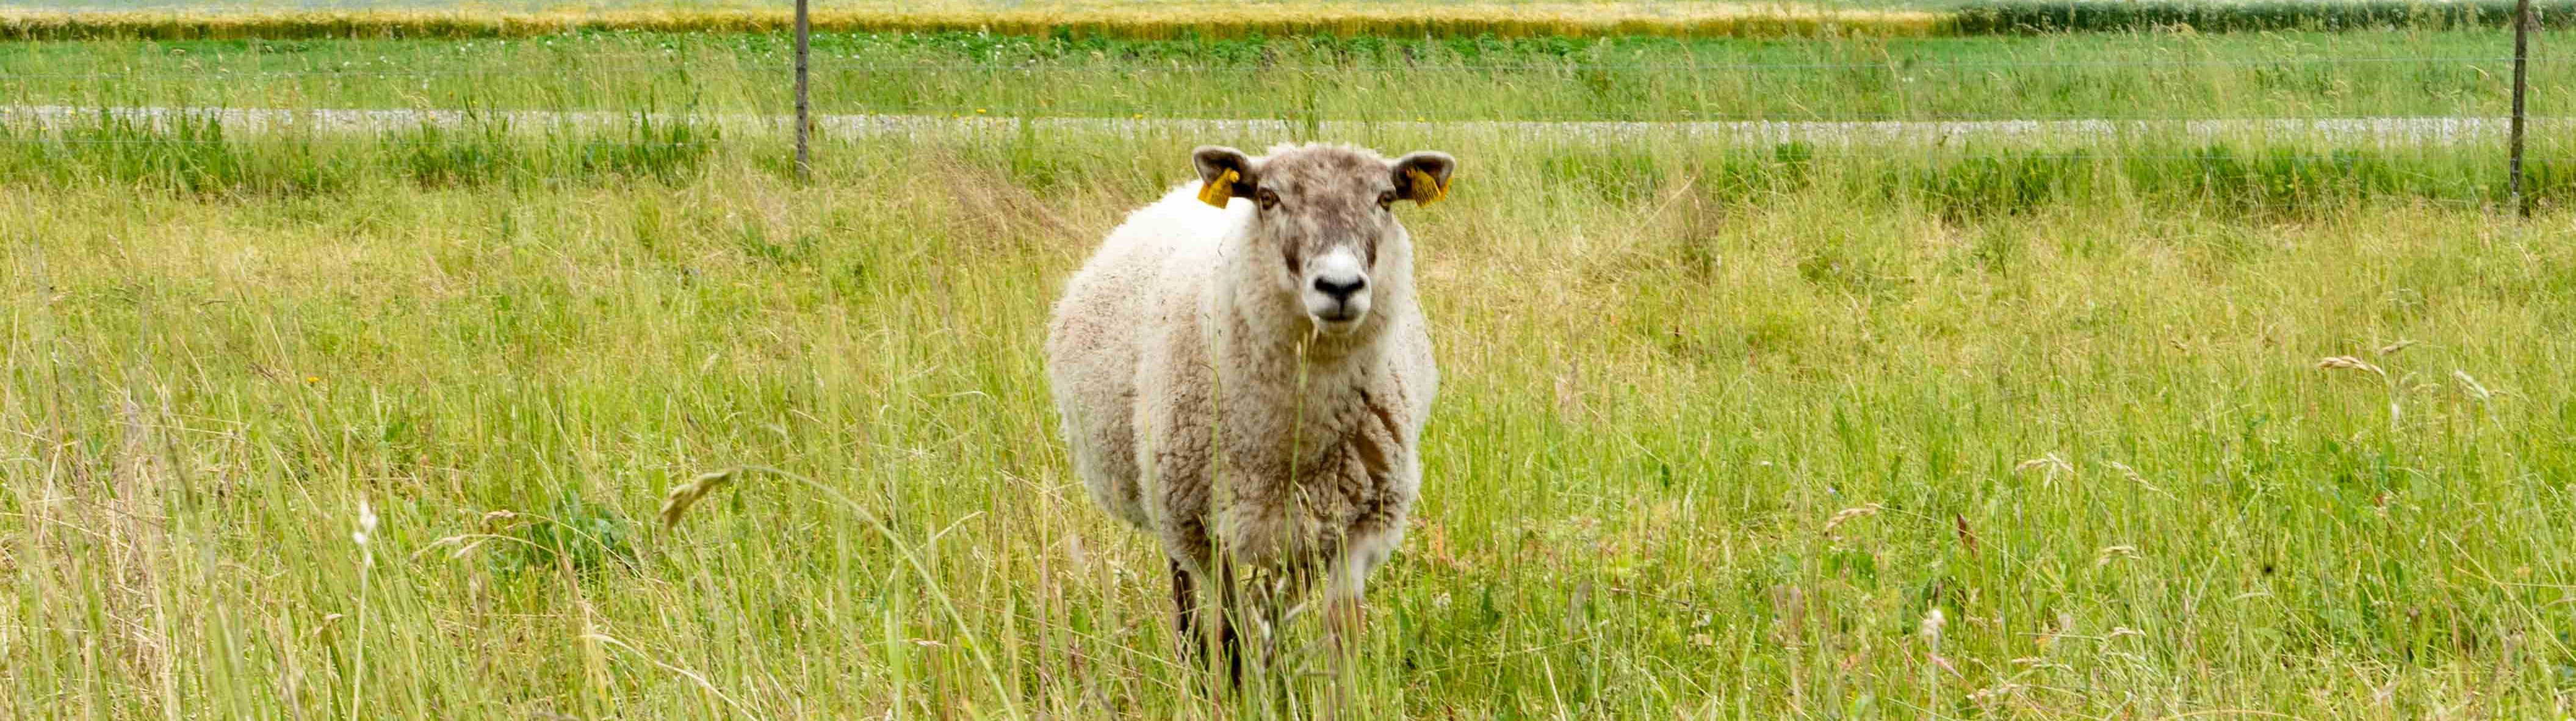 Sheep of the Danish breed Klitfår looking into the camera at a green meadow.